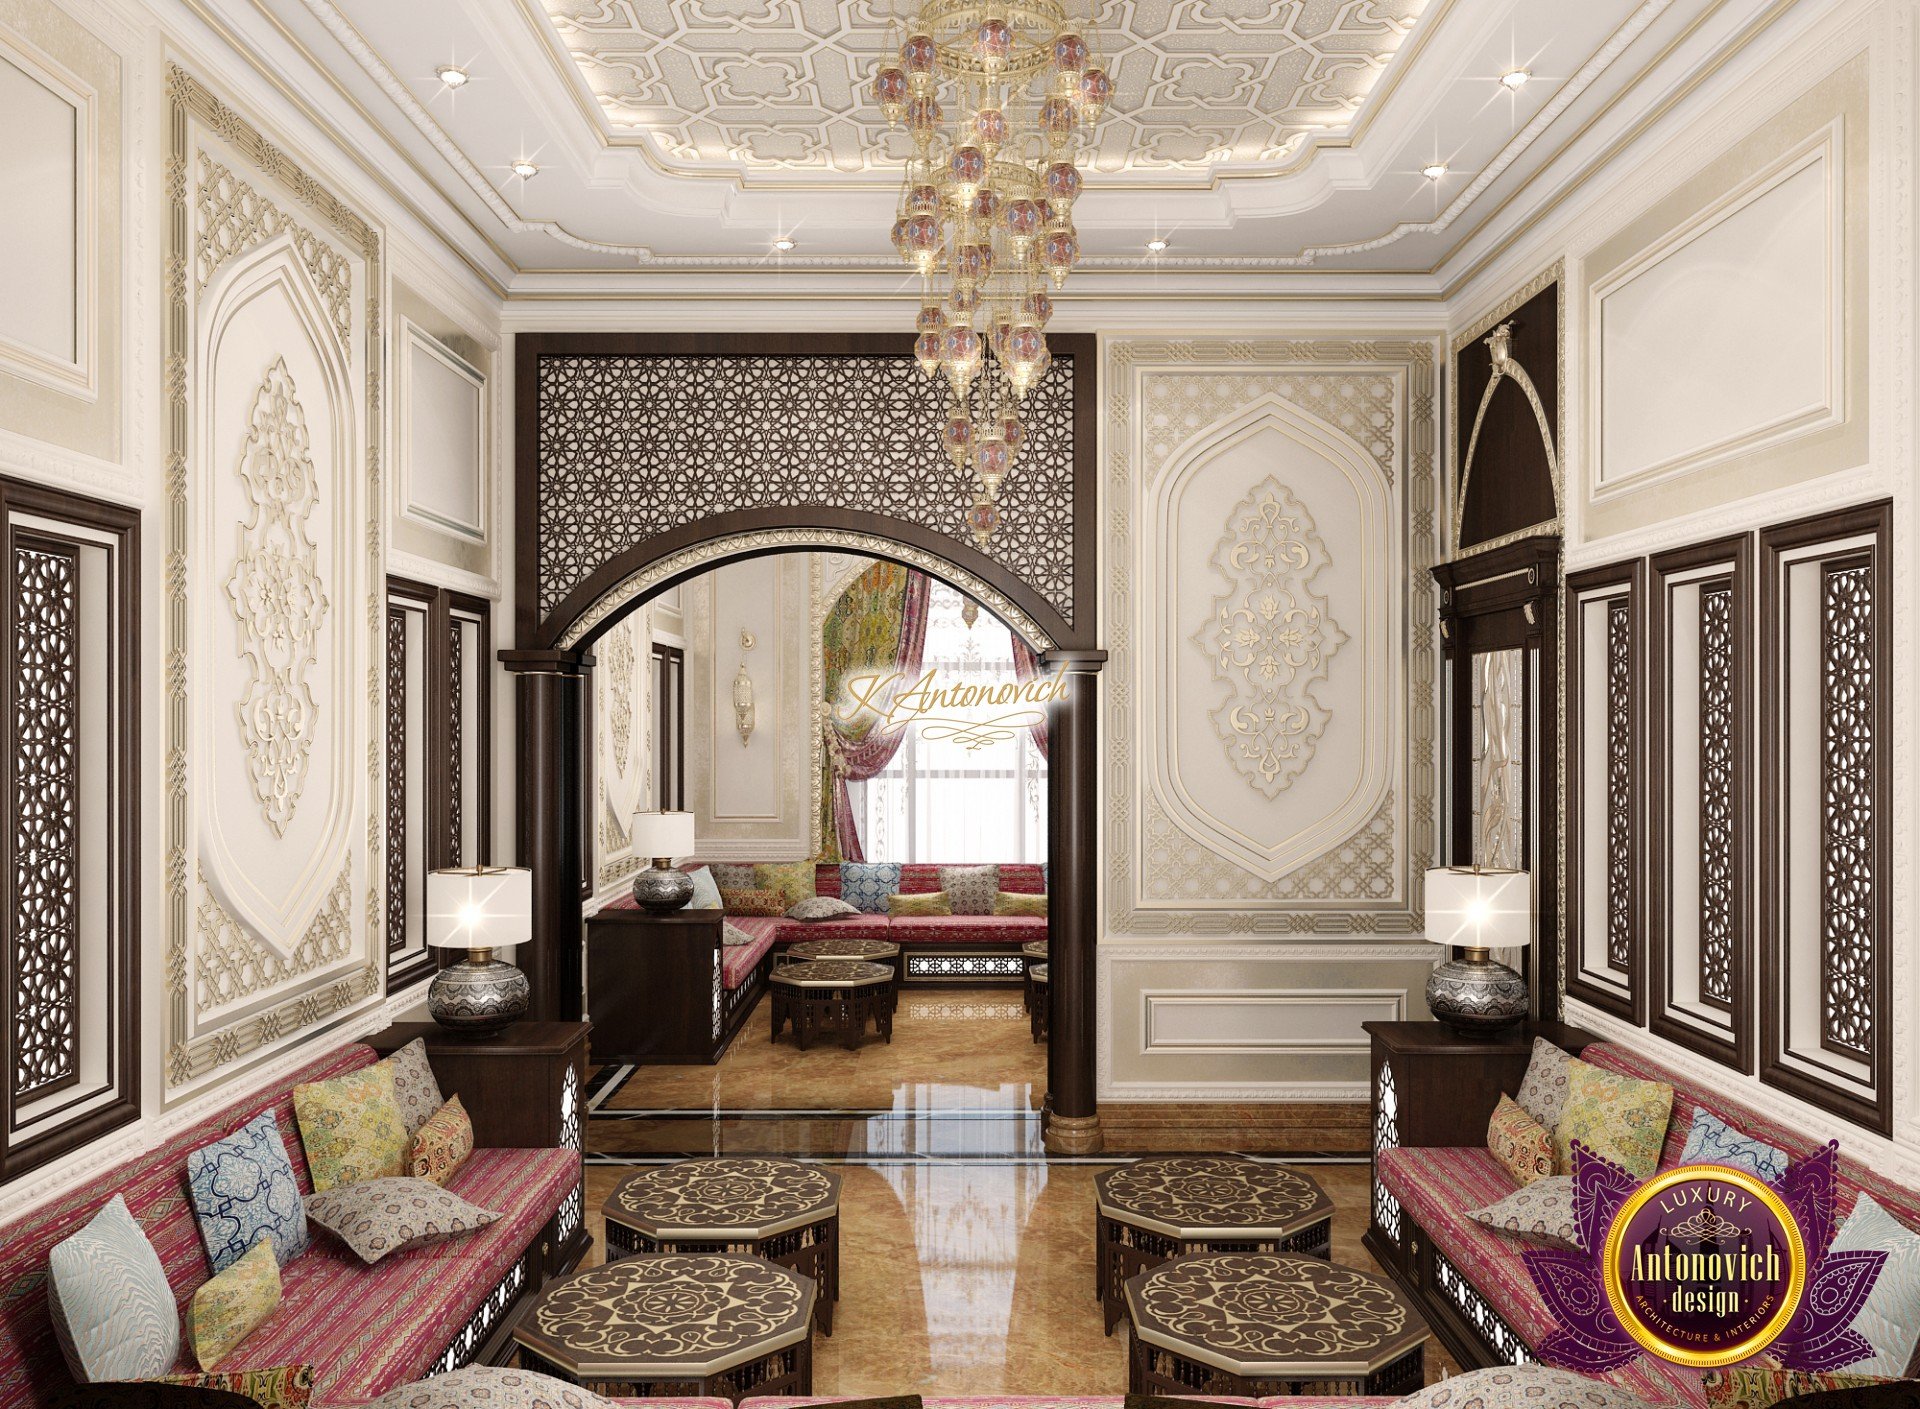  Living room in Arabic style